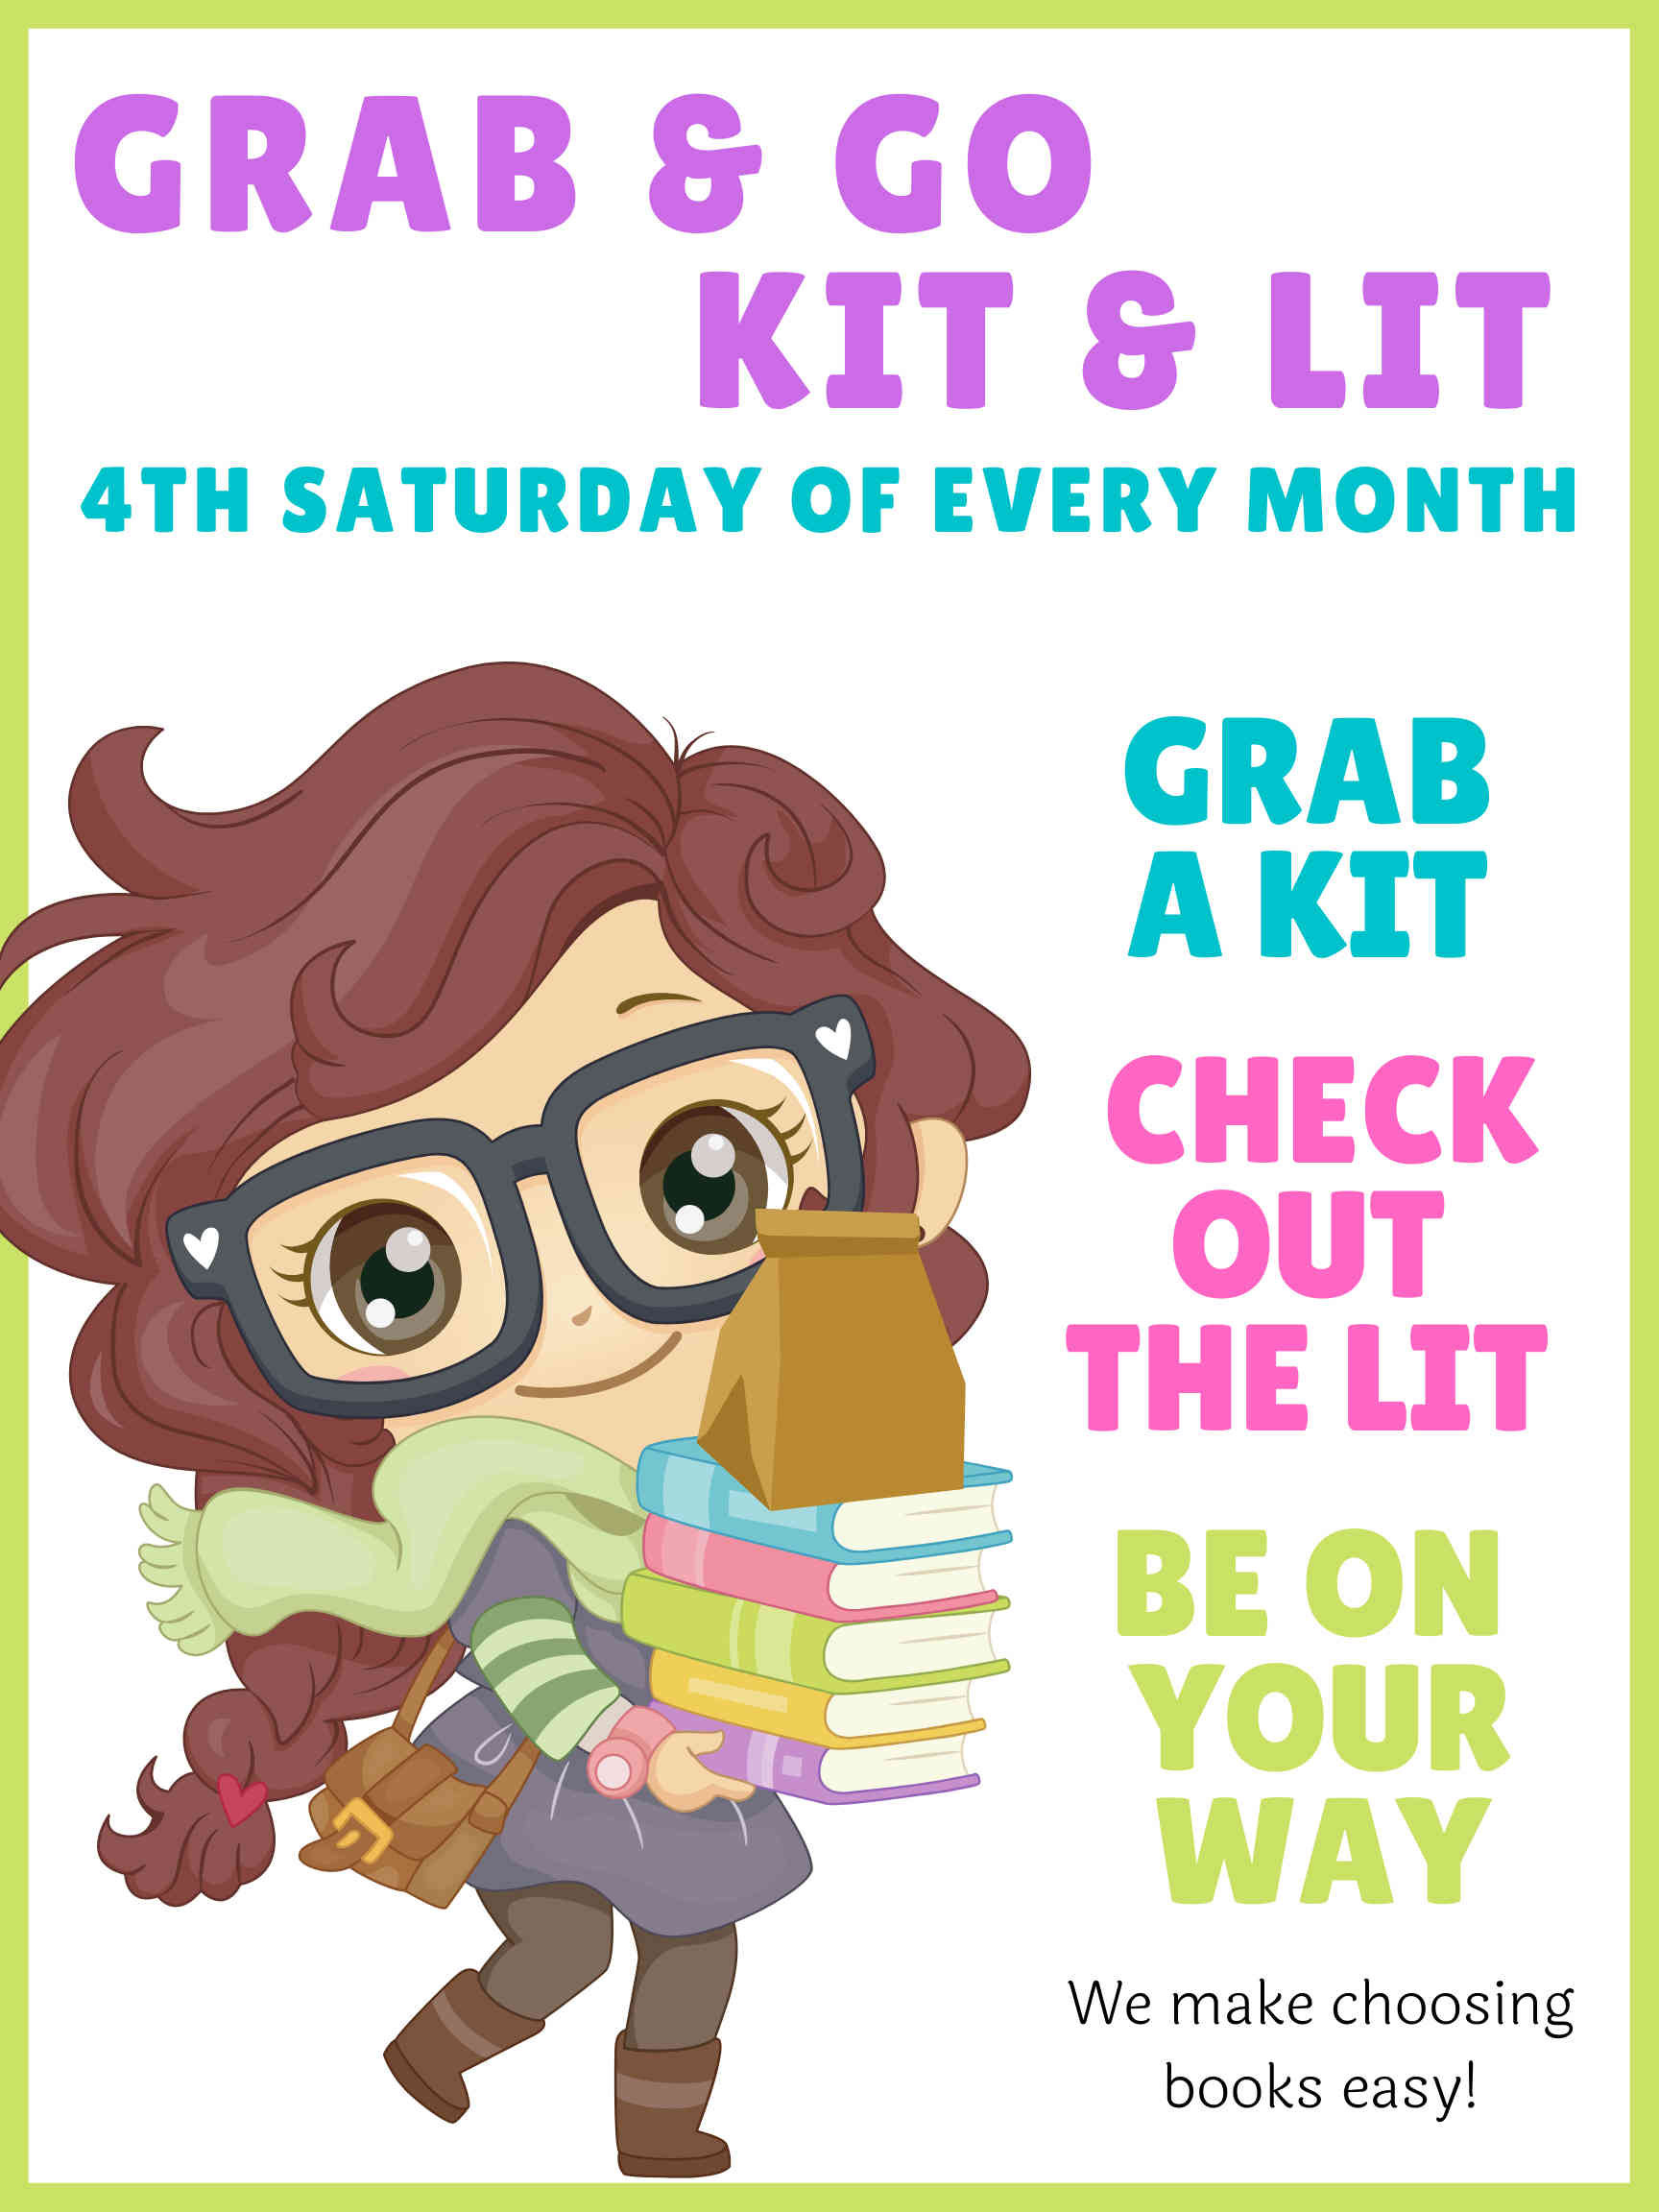 Kit & Lit - grab and go activities